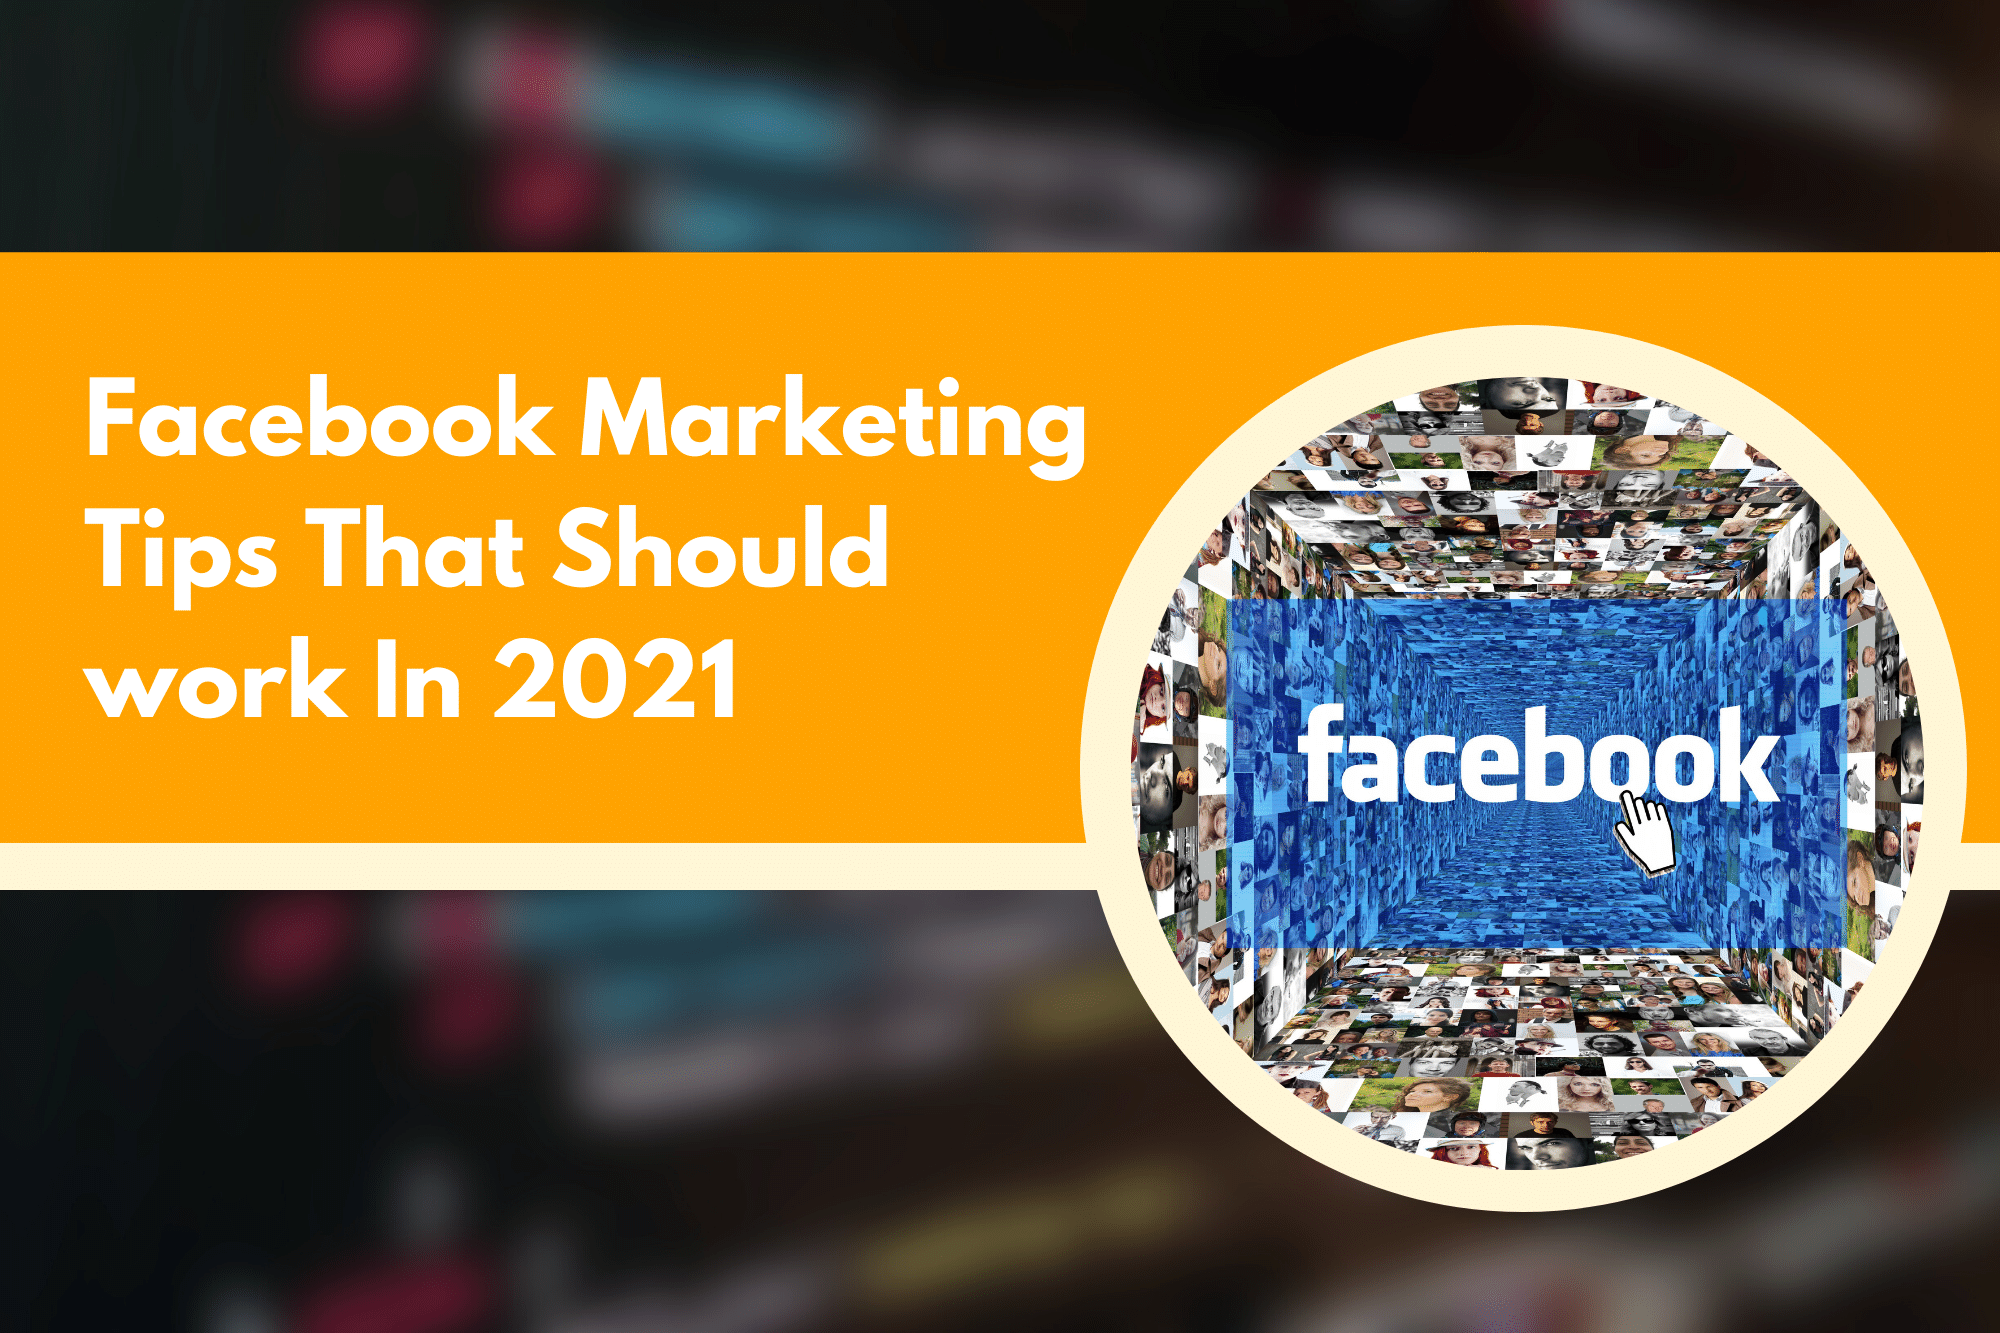 Facebook Marketing Tips That Should work In 2021